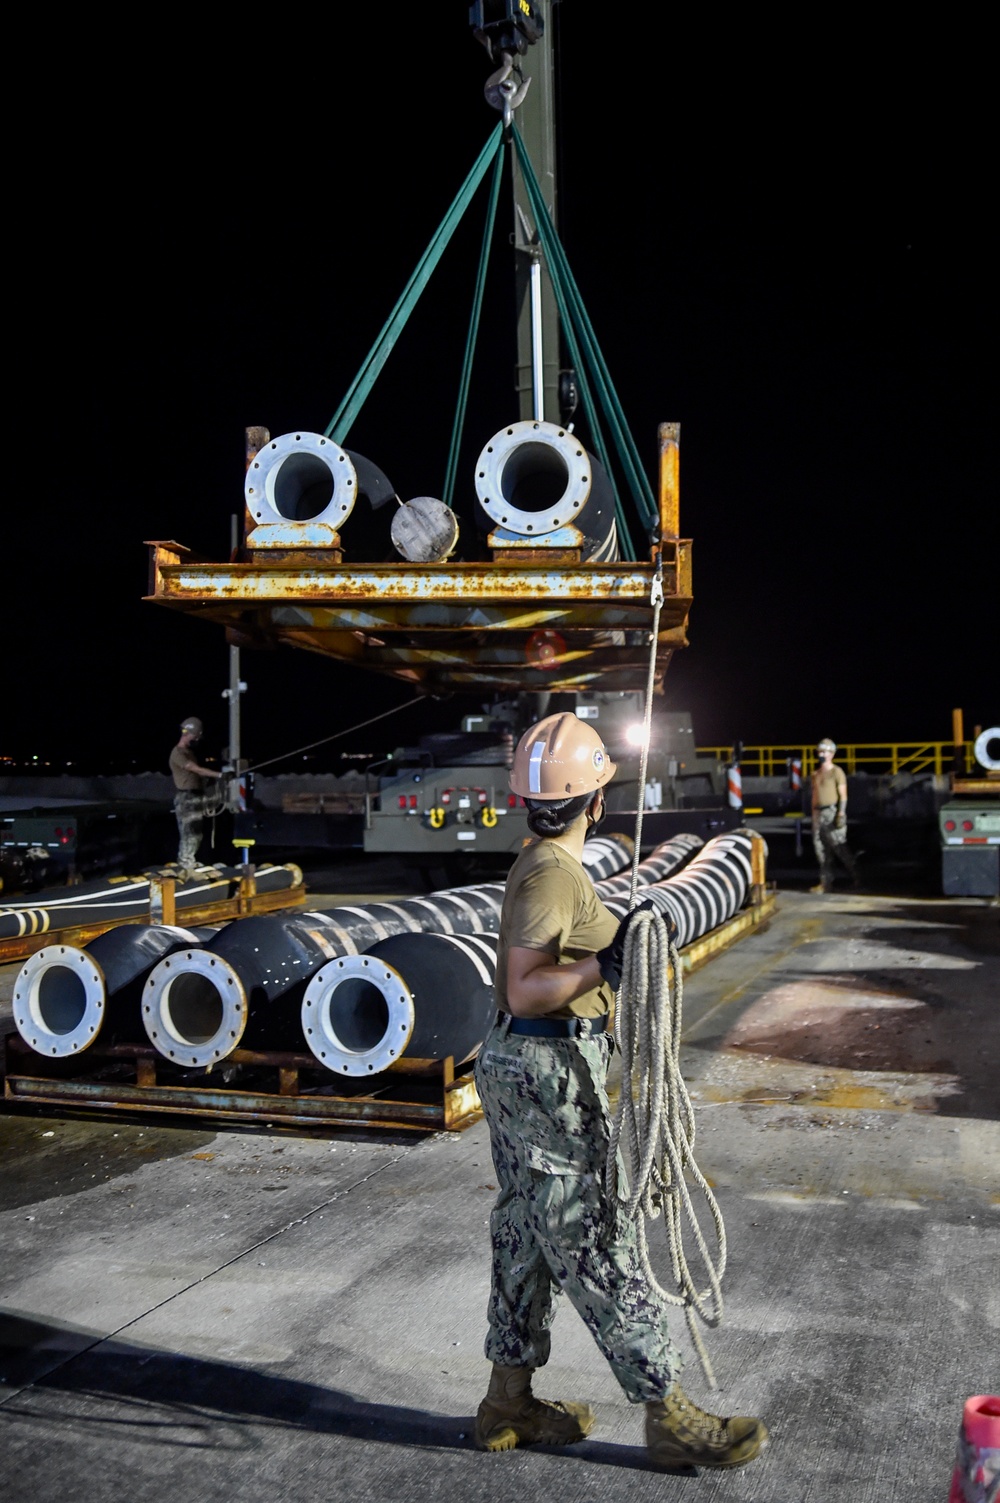 U.S. Navy Seabees assigned to NMCB-5 support the Defense Logistics Agency